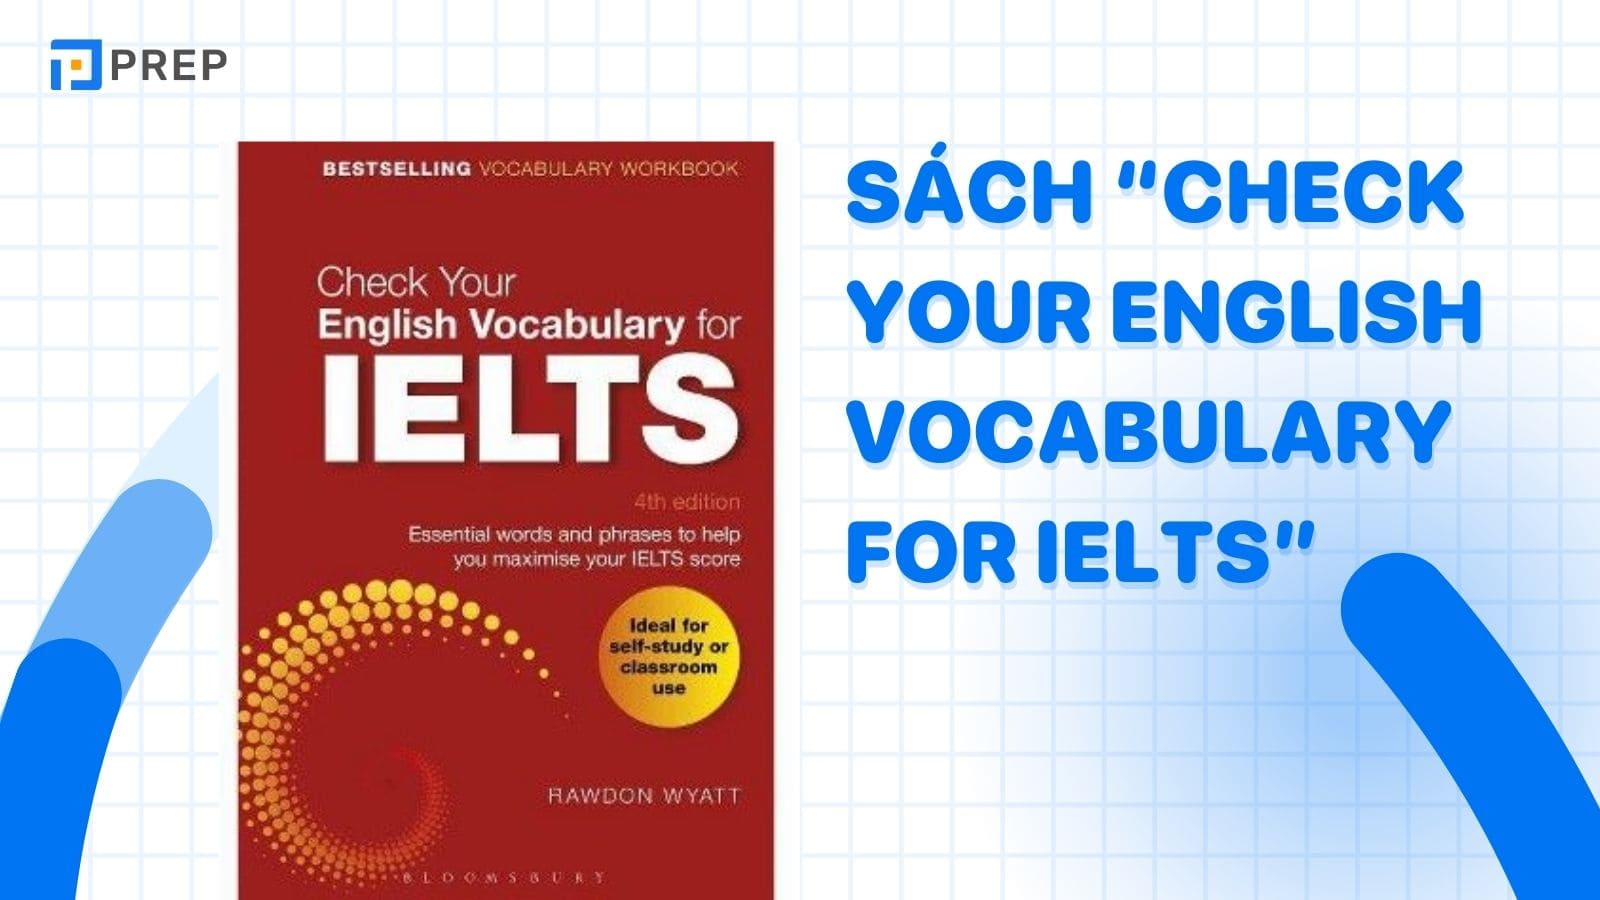 check-your-english-vocabulary-for-ielts.jpg